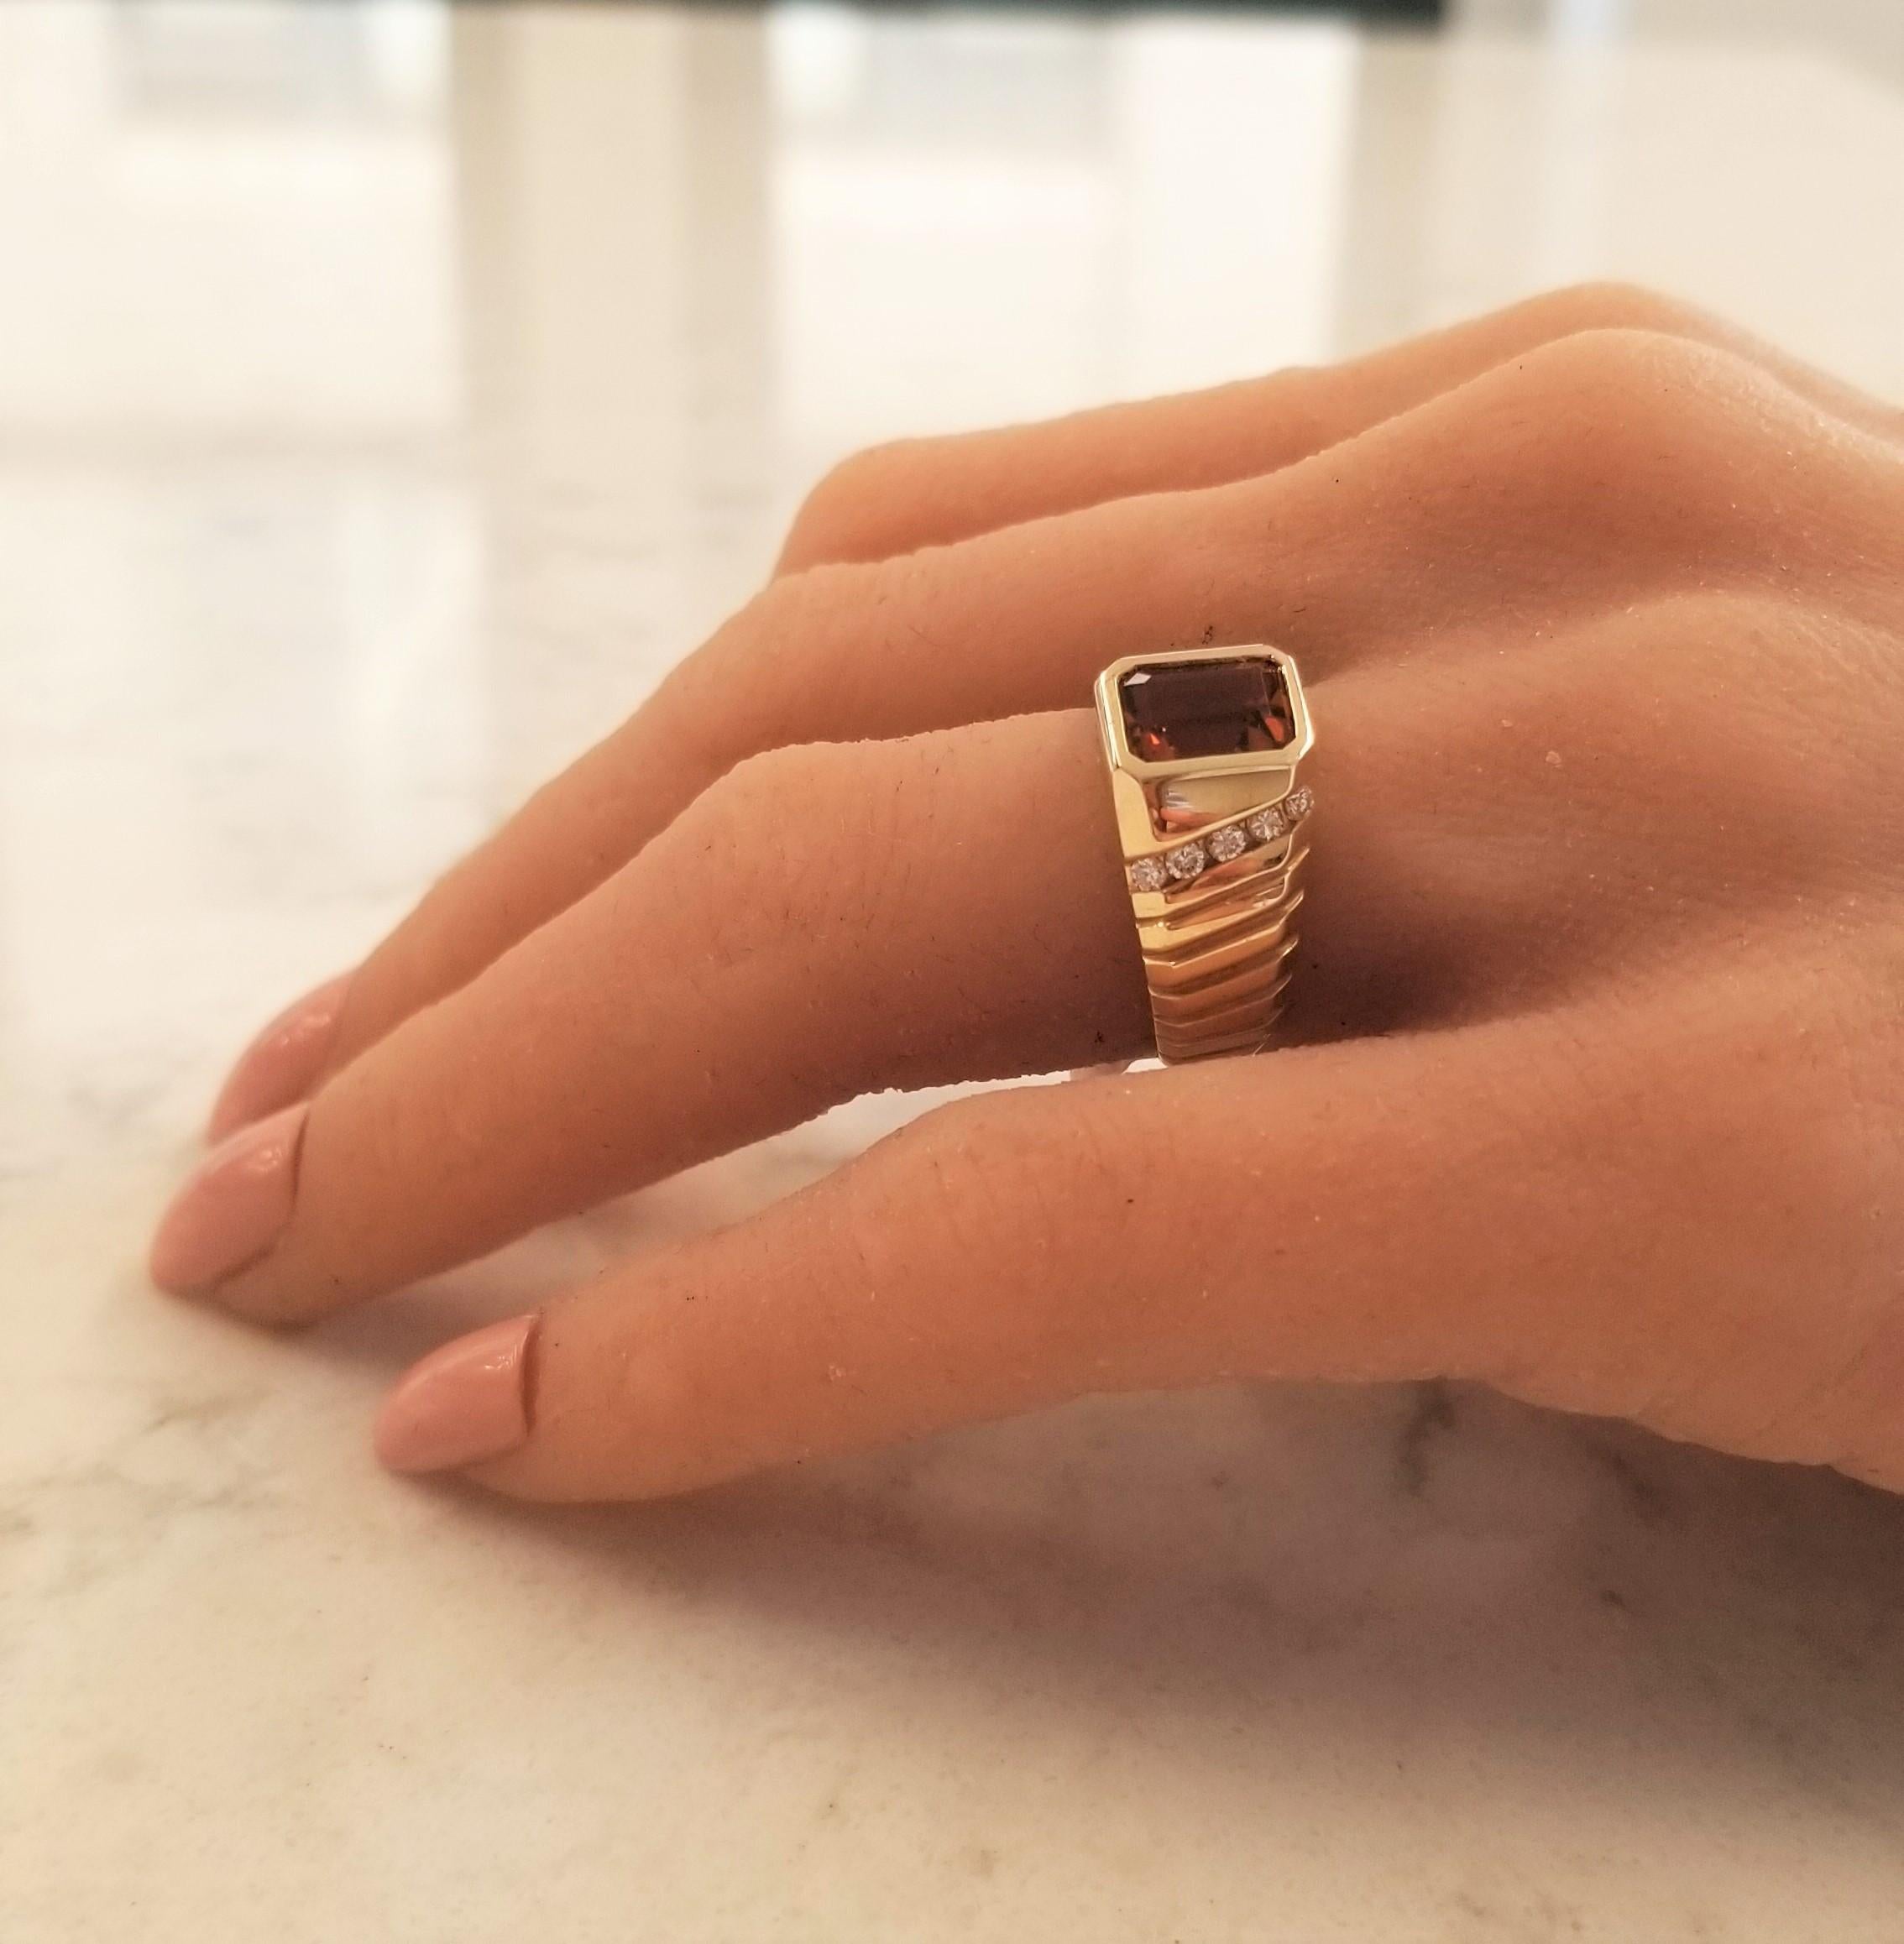 This ring features a 3.50 carat emerald cut Citrine measuring 8.9 x 7.0mm. The gem source is Brazil. Its color is dark orange. Its transparency and luster are excellent. The gem is accented by 10 sparkling round brilliant cuts, channel set, totaling